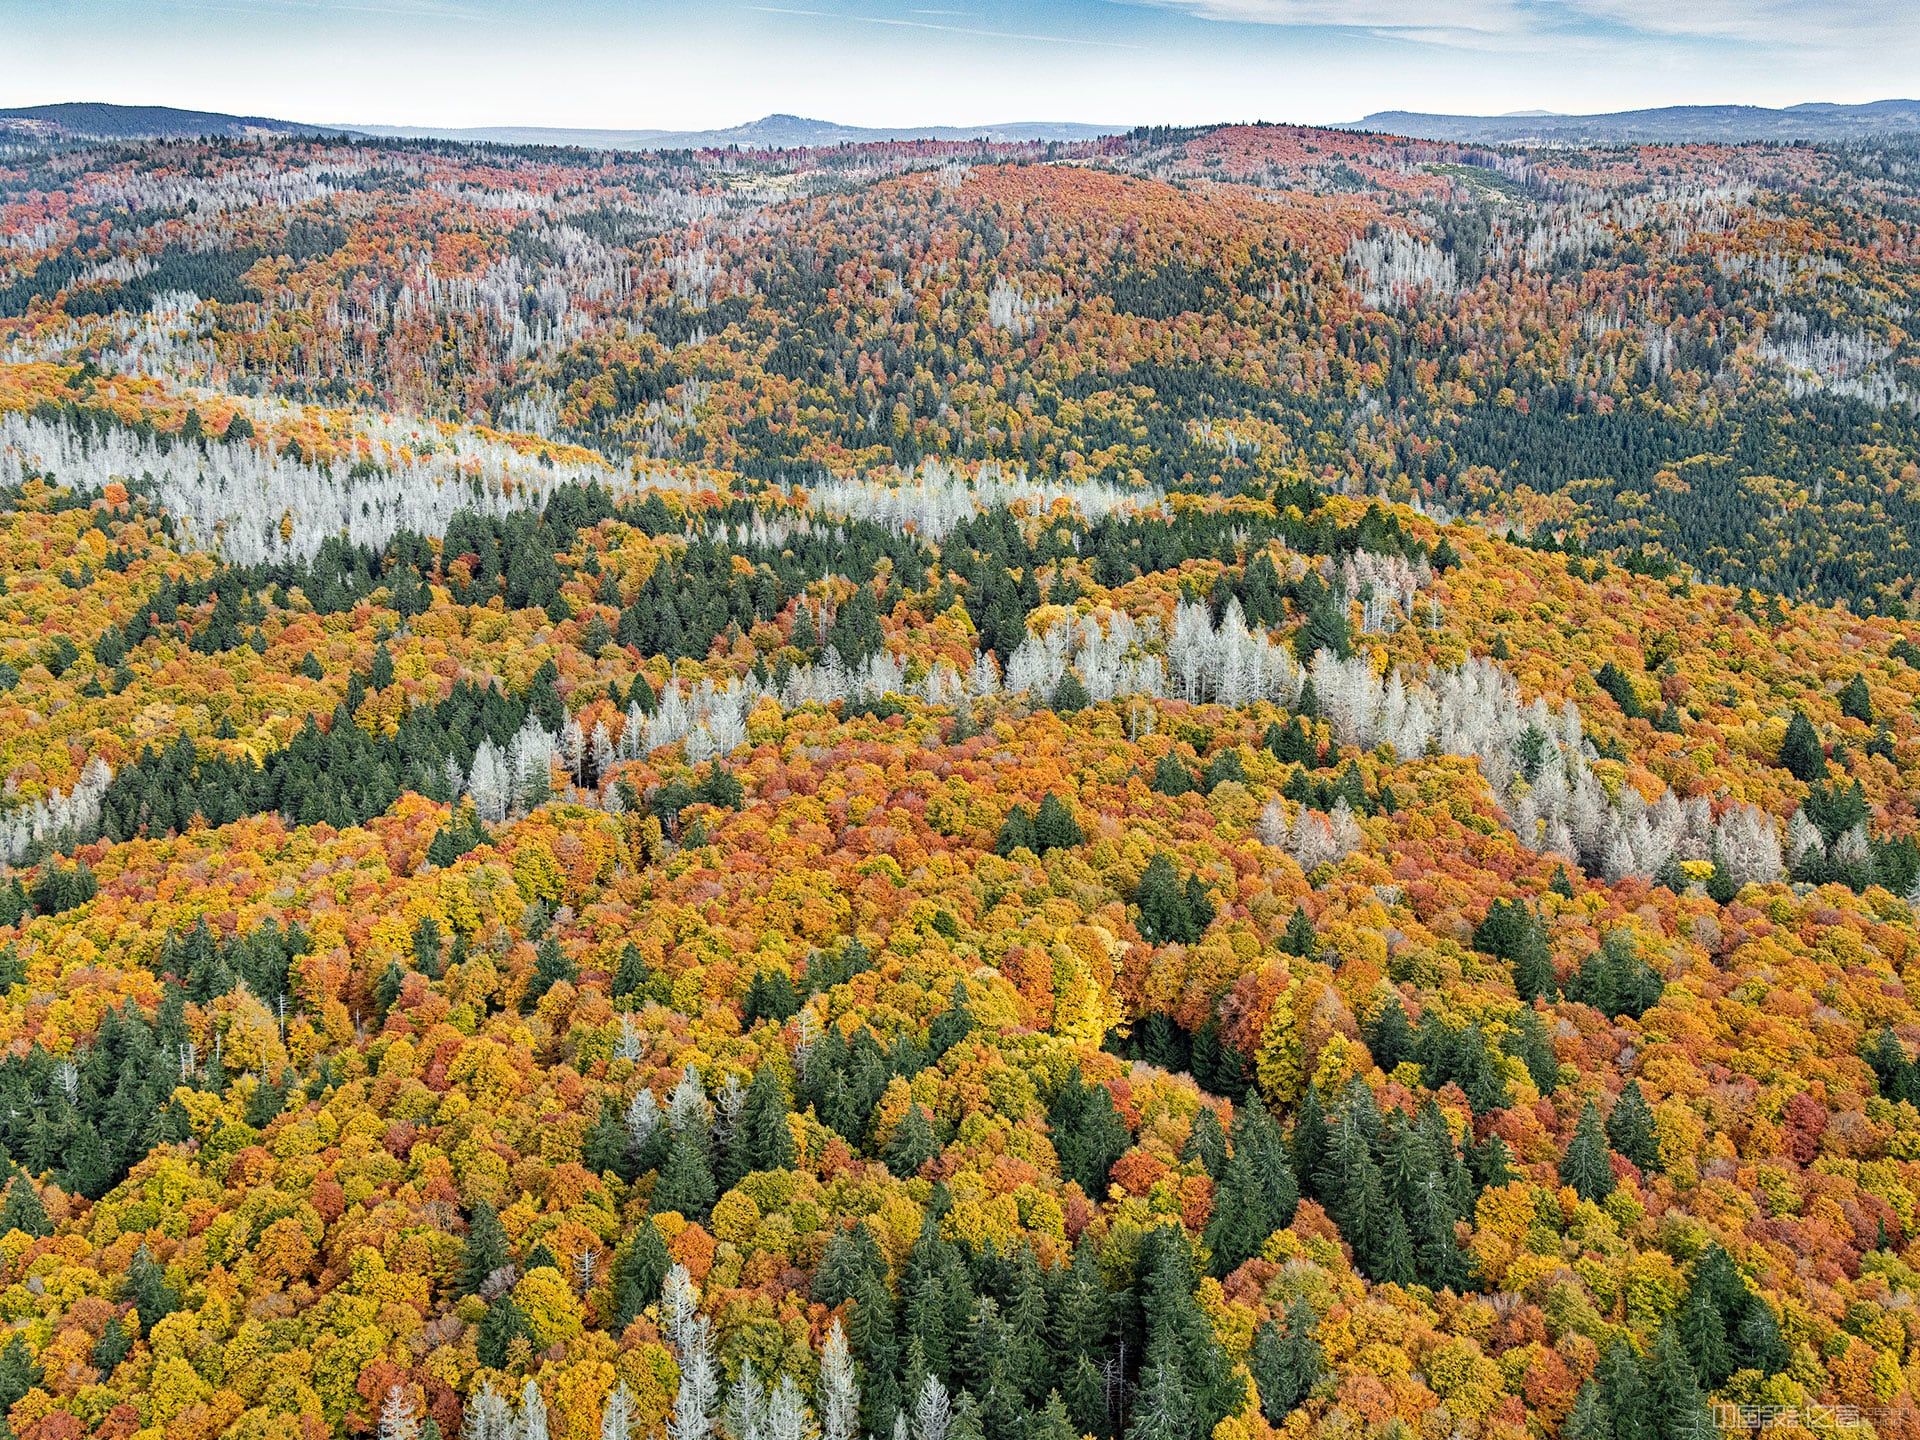 An aerial photo of a forest with autumn leaves